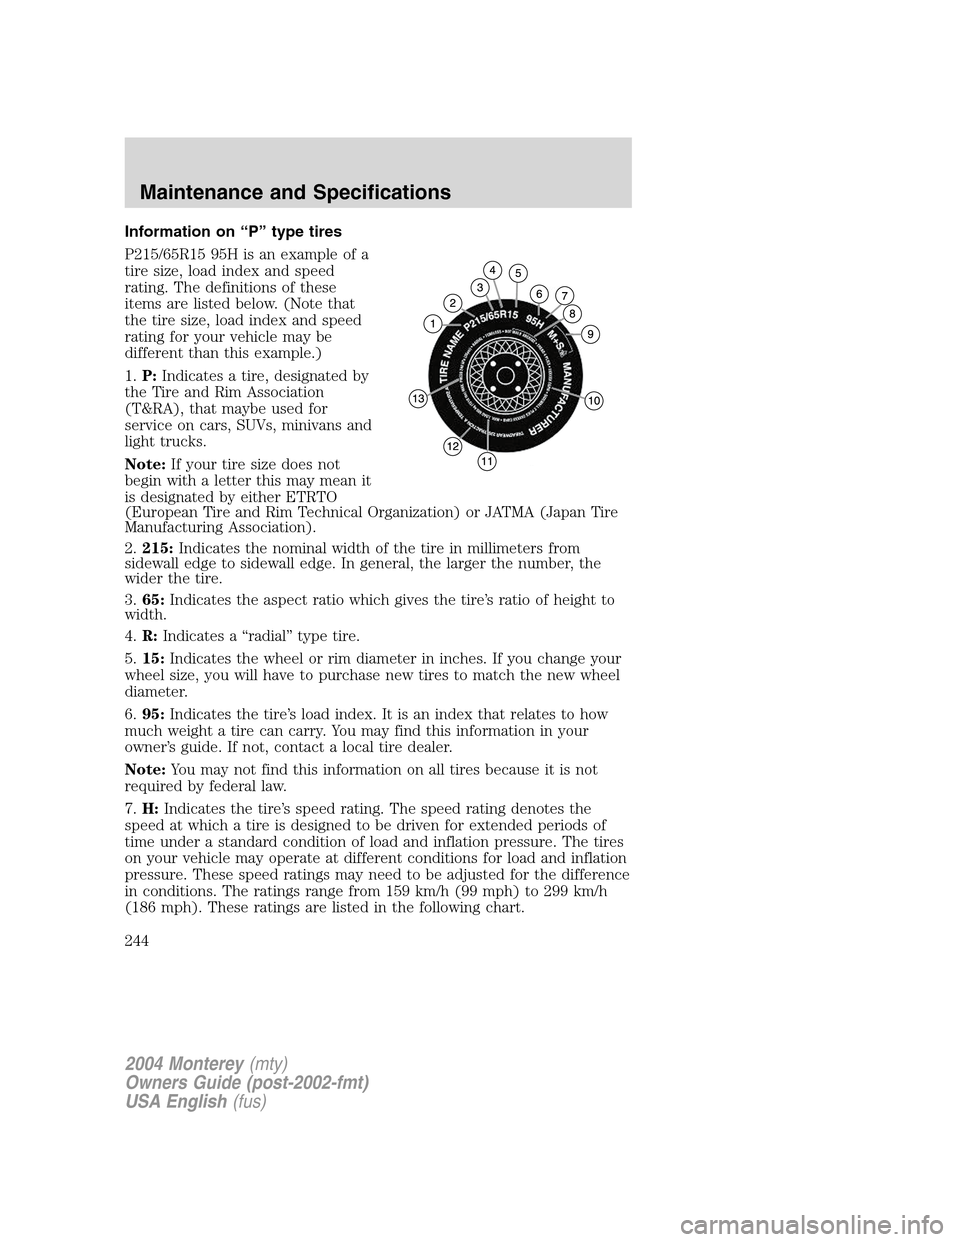 Mercury Monterey 2004  Owners Manuals Information on“P”type tires
P215/65R15 95H is an example of a
tire size, load index and speed
rating. The definitions of these
items are listed below. (Note that
the tire size, load index and spee